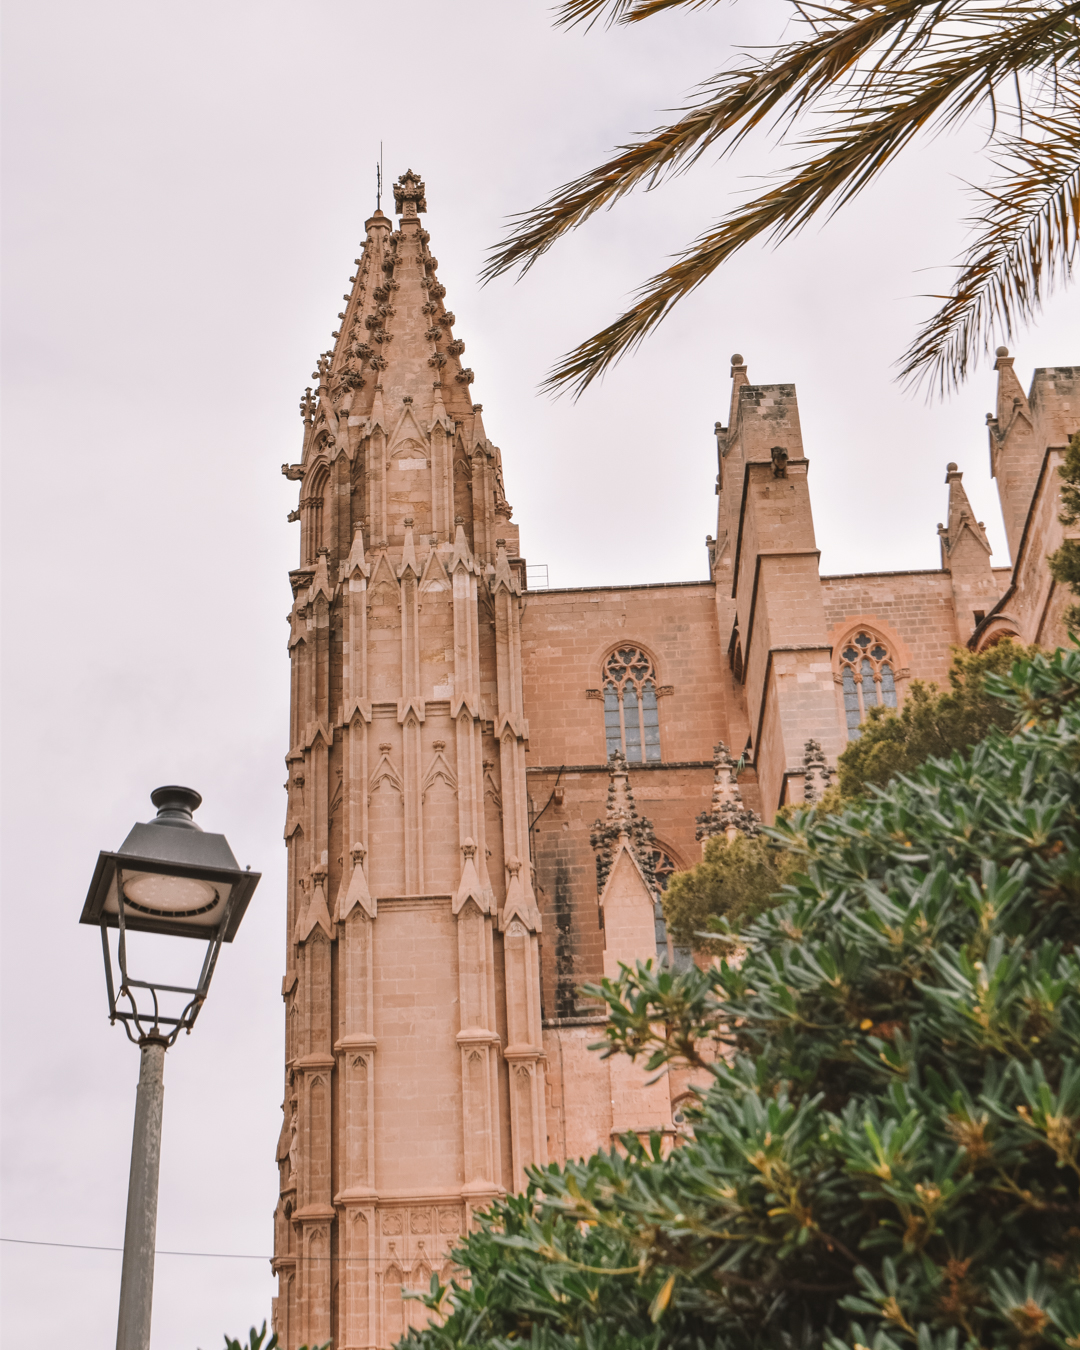 Visit The Palma de Mallorca Cathedral - one of the top things to do in Palma